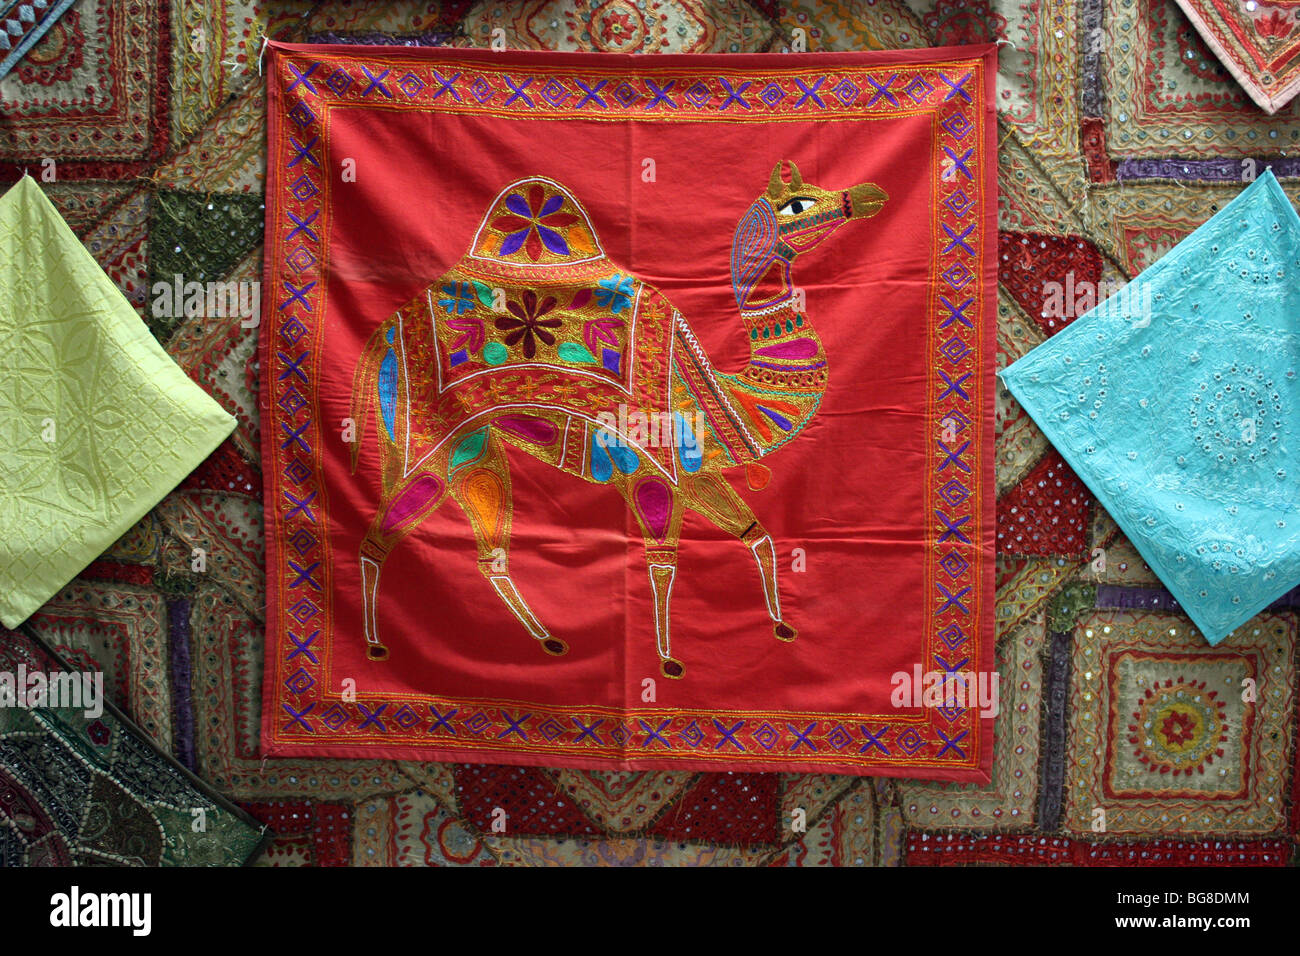 textile shop in rajathan. Art work camel display on a towel Stock Photo